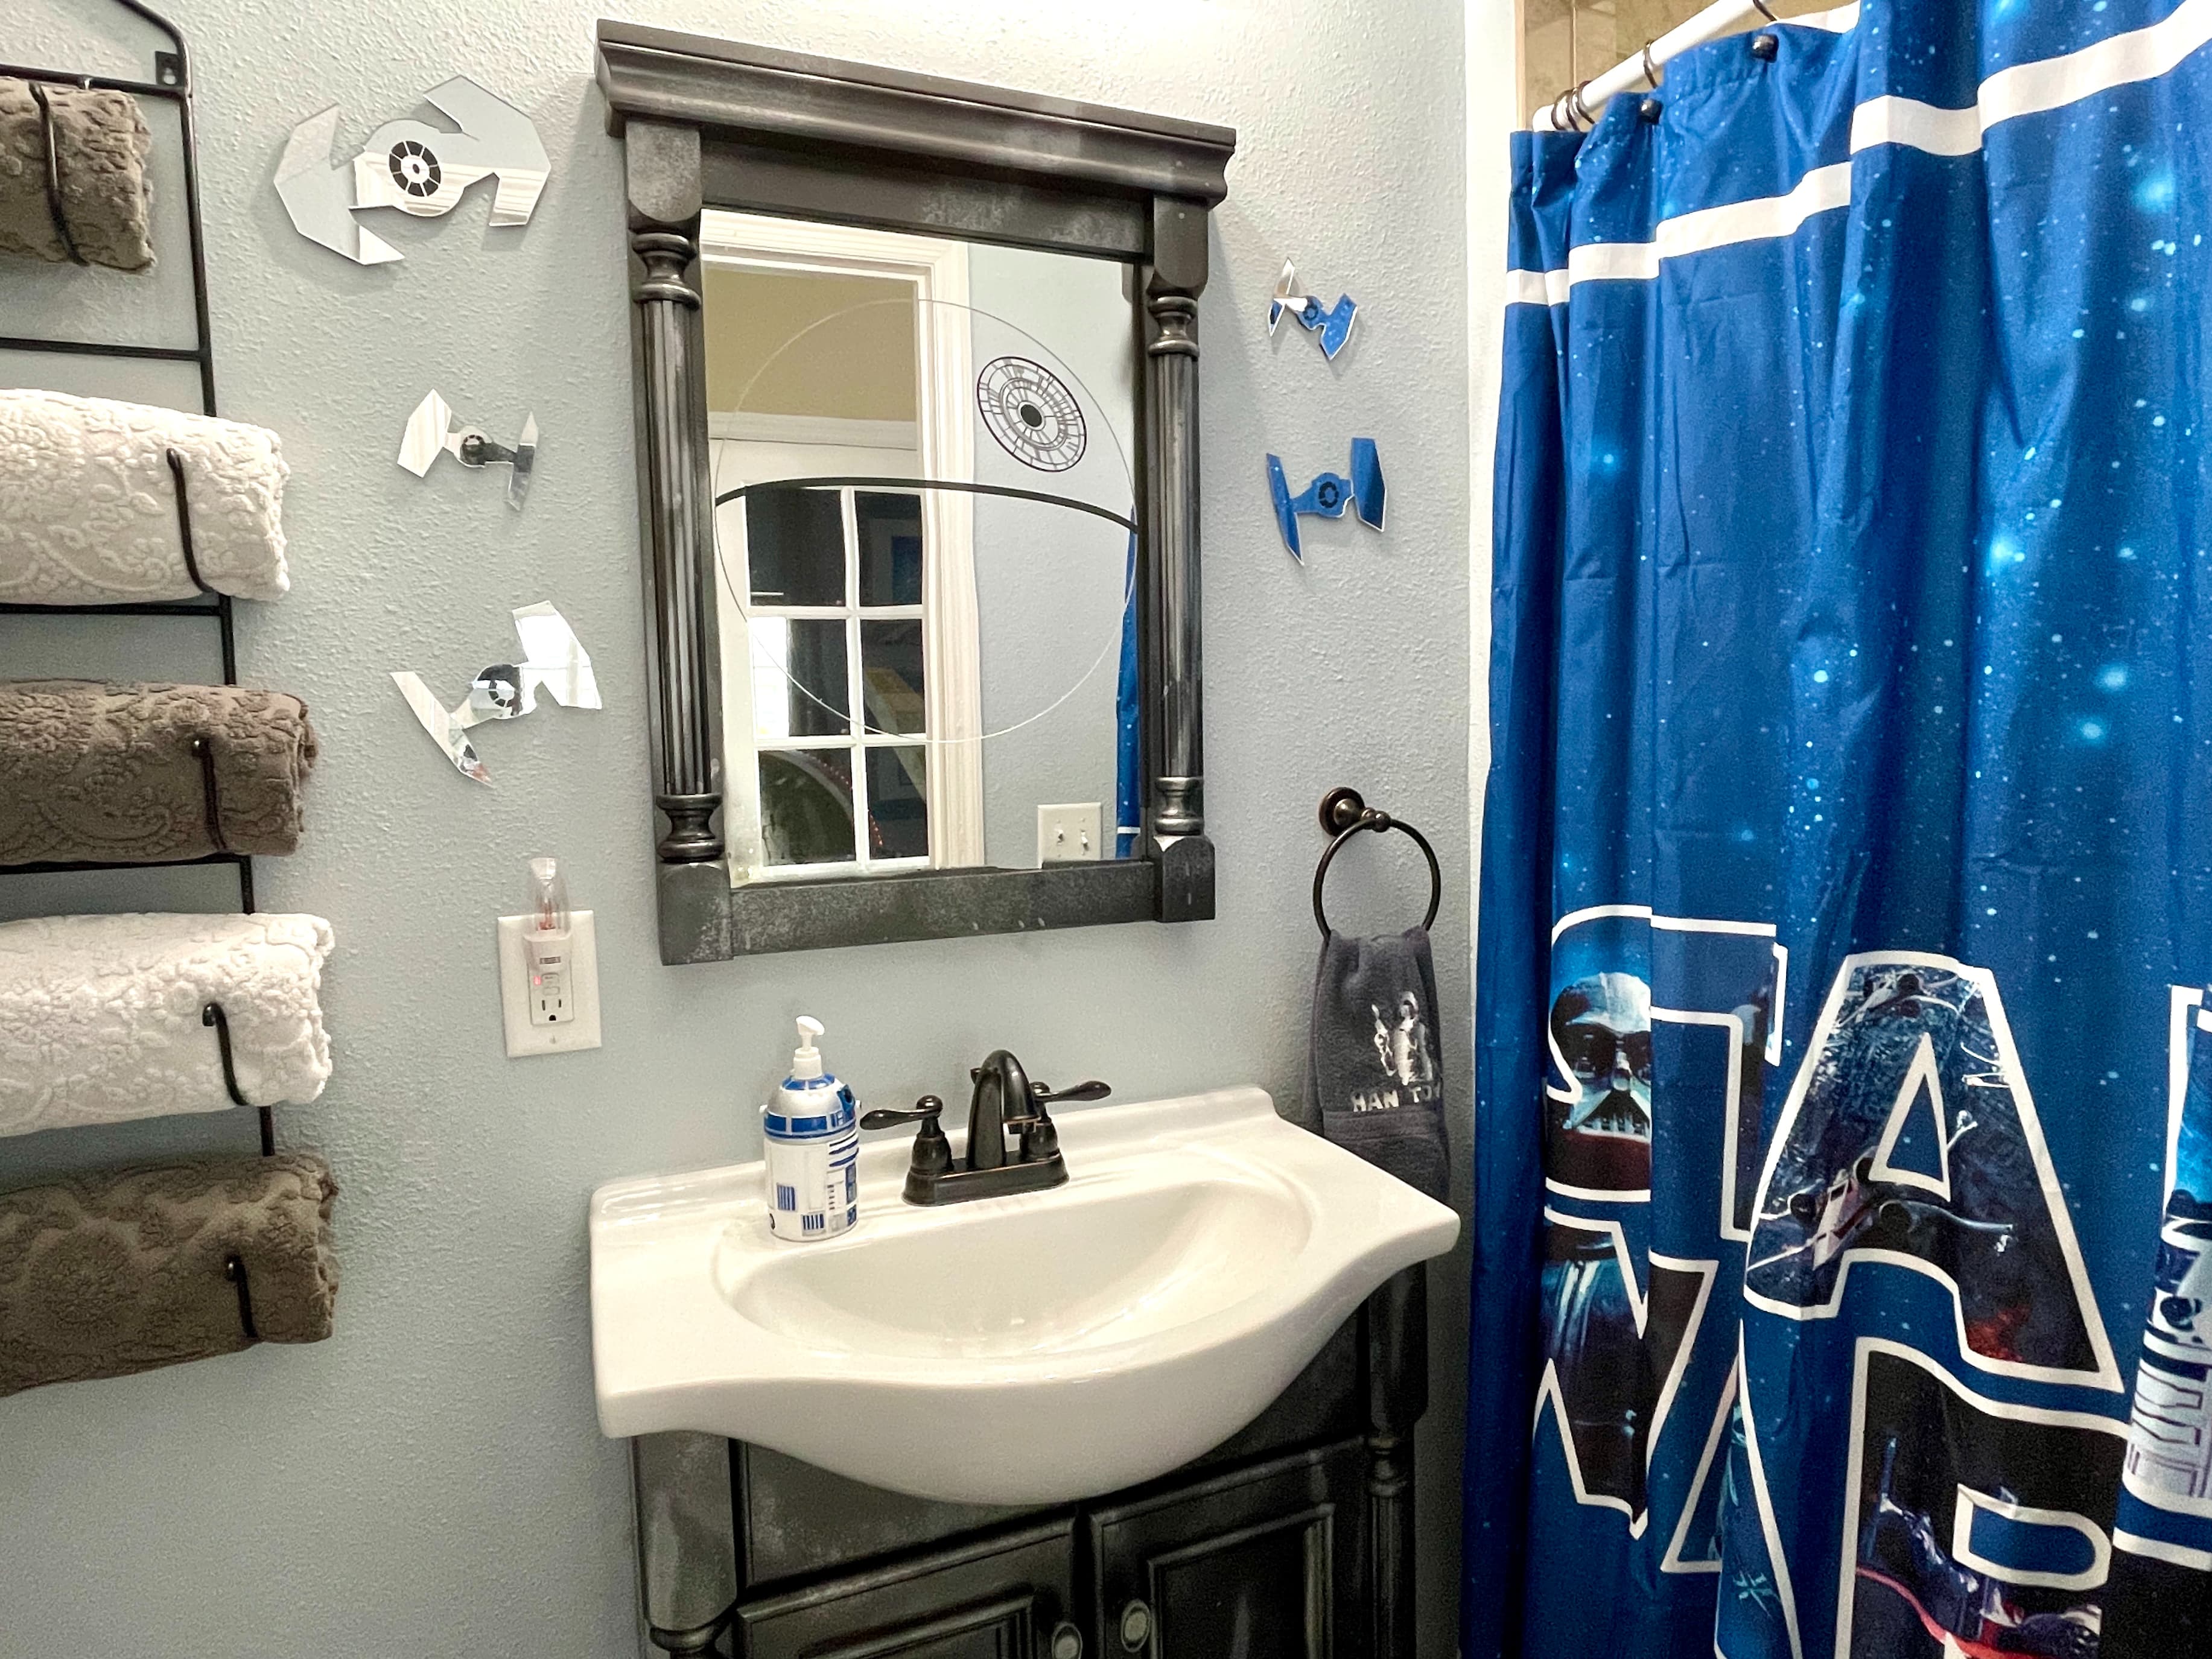 Detached STAR WARS bathroom is just two steps into the hall from the STAR WARS and ENCANTO bedrooms.